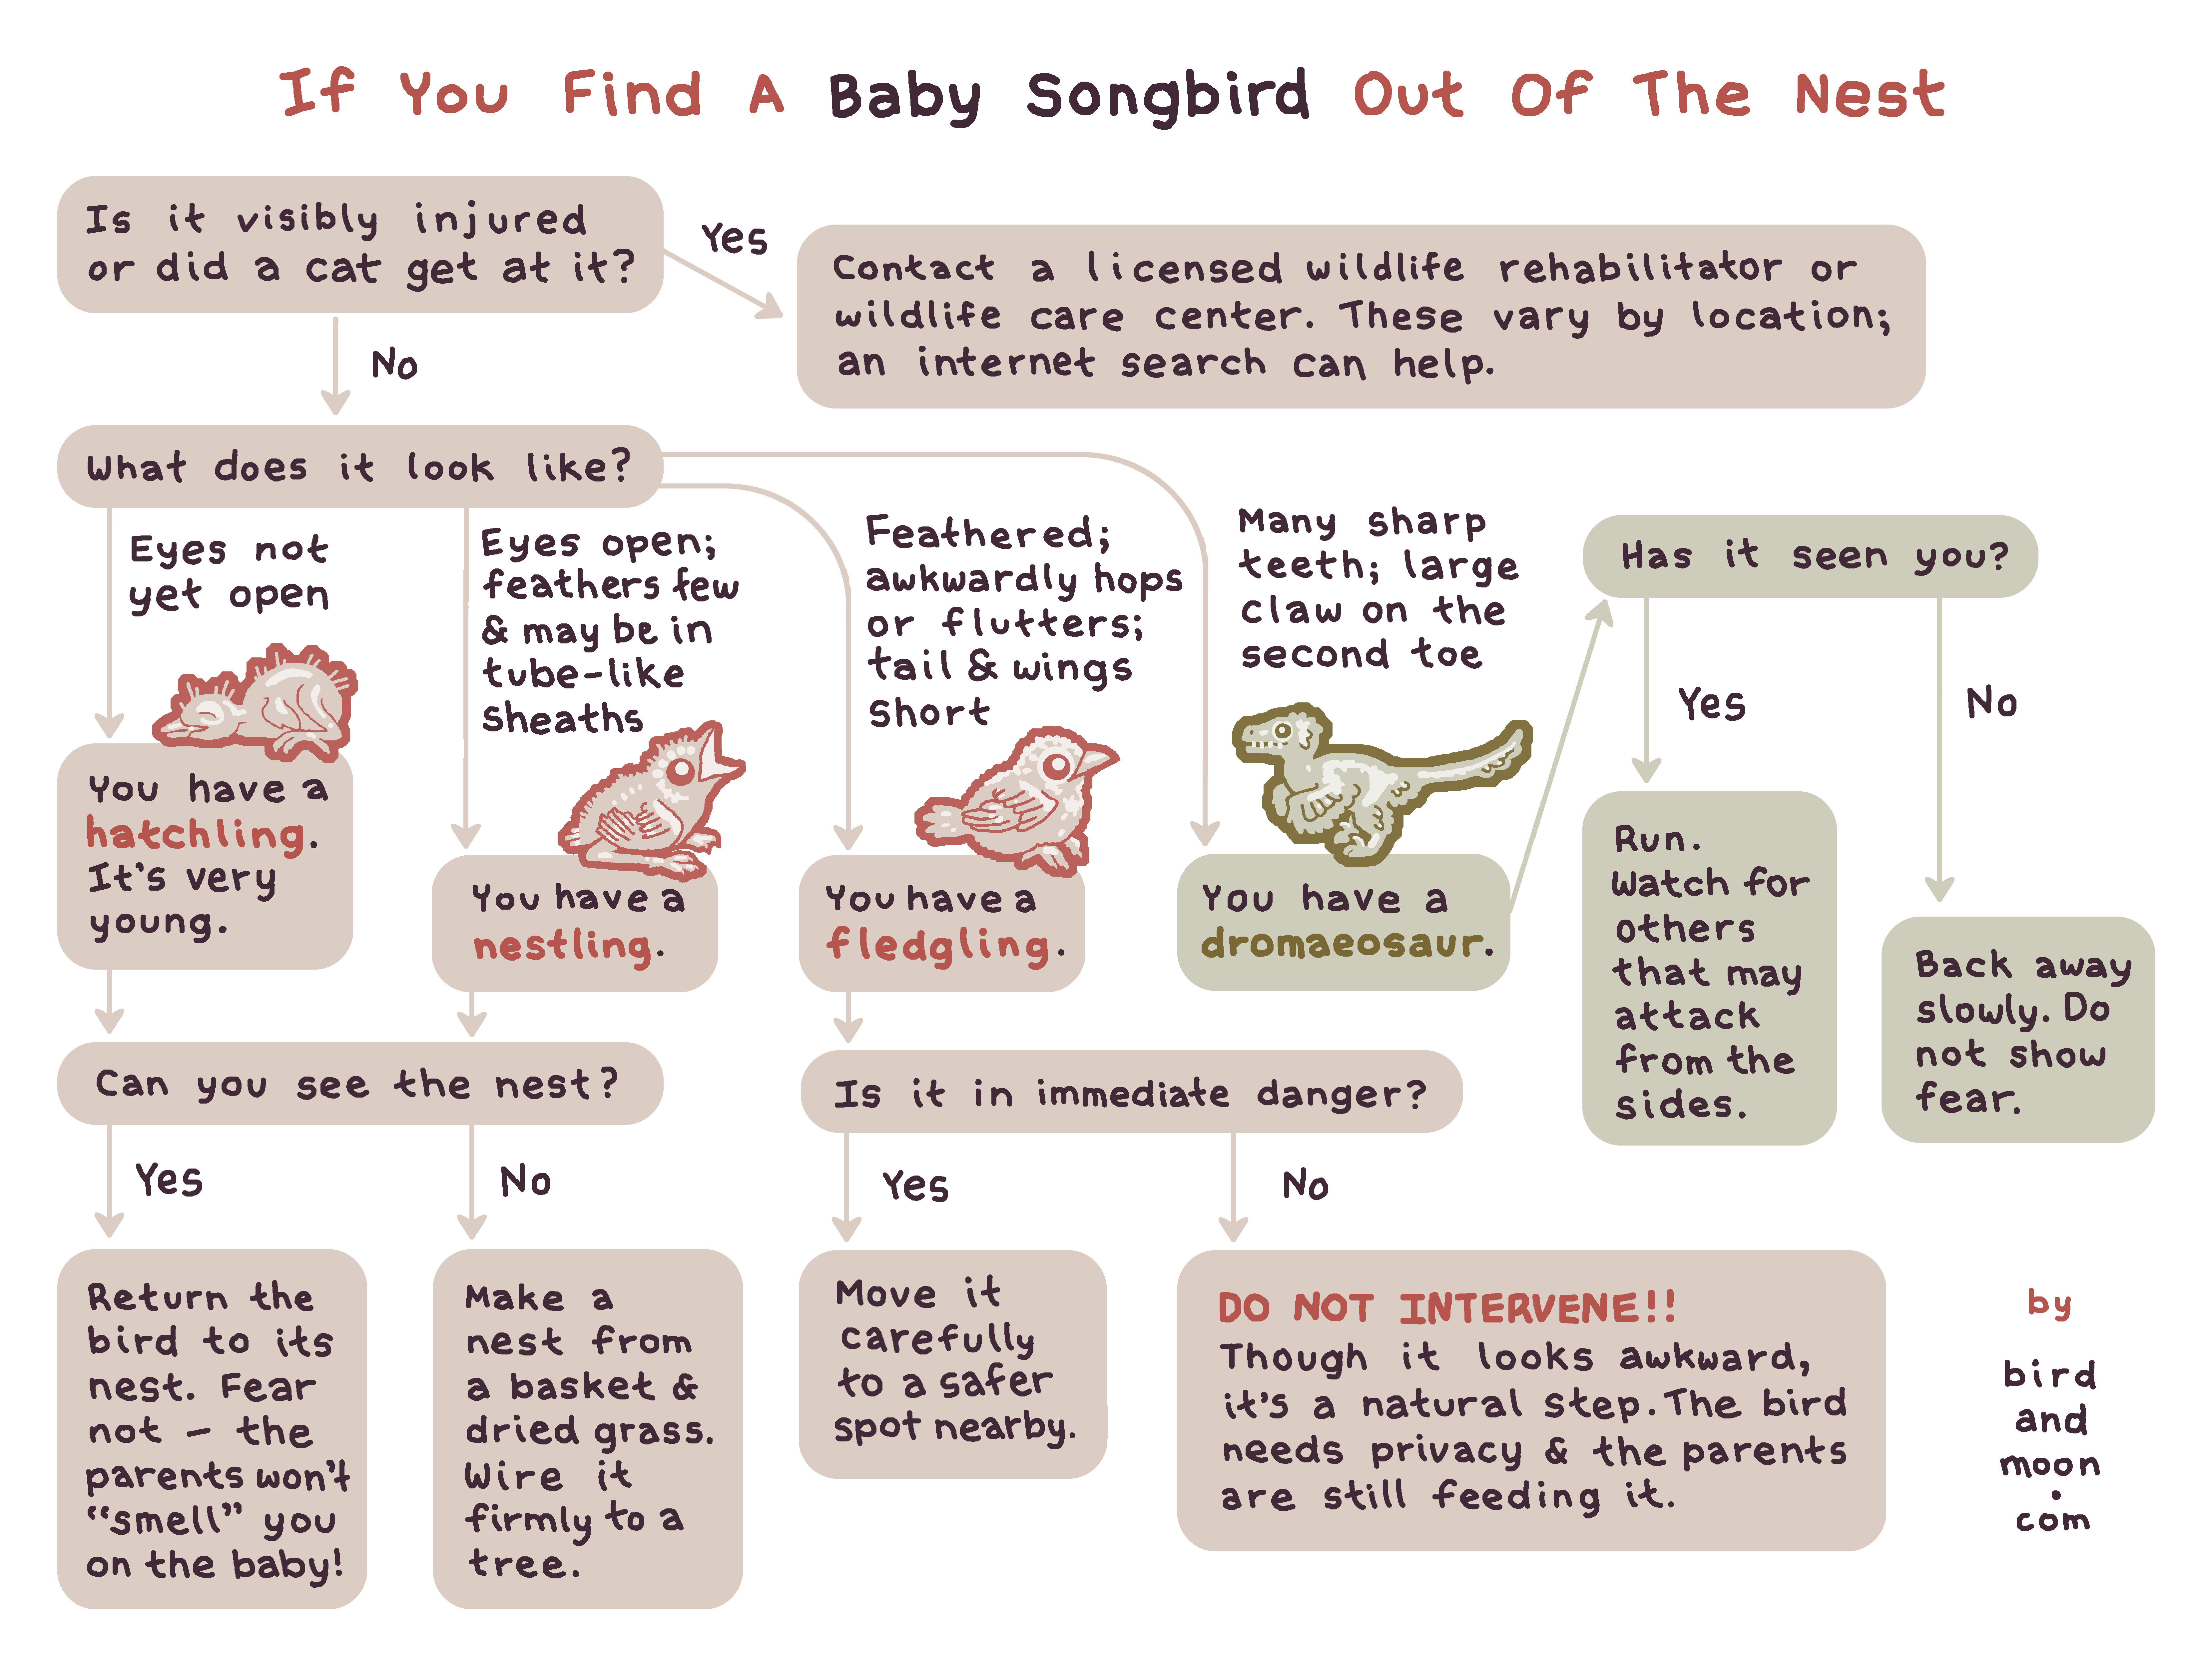 If You Find a Baby Songbird Out Of The Nest